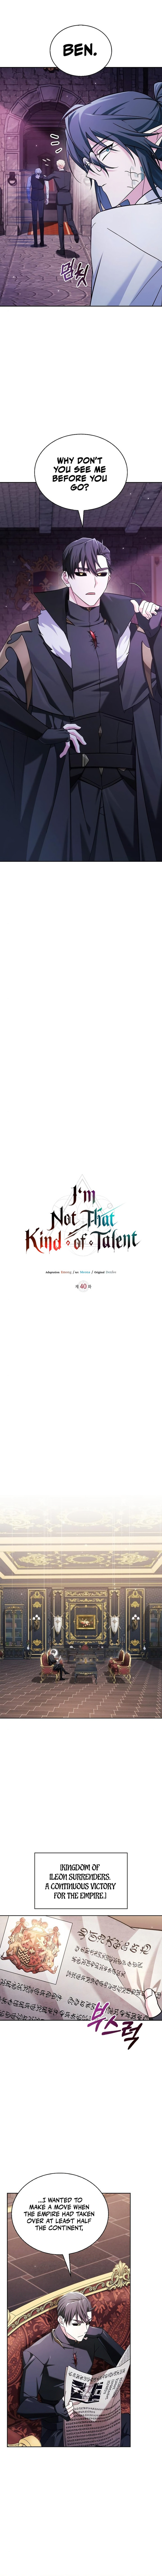 Im Not That Kind Of Talent Chapter 40 Page 11